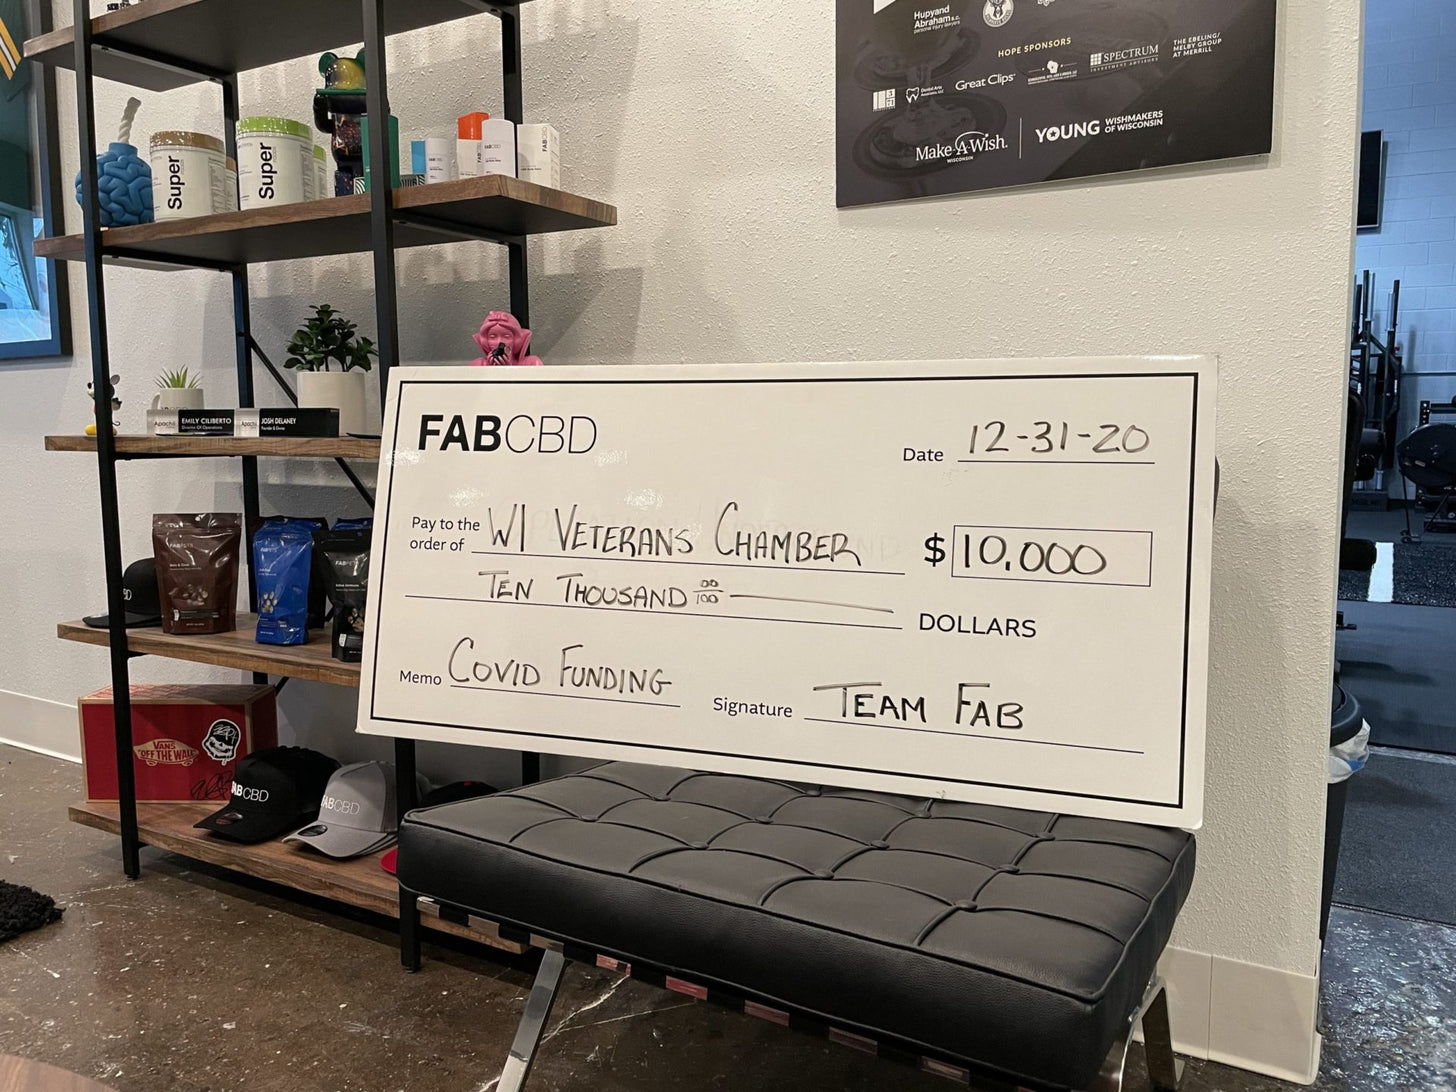 A check for $10,000 from FAB CBD to Wisconsin Veteran's Chamber